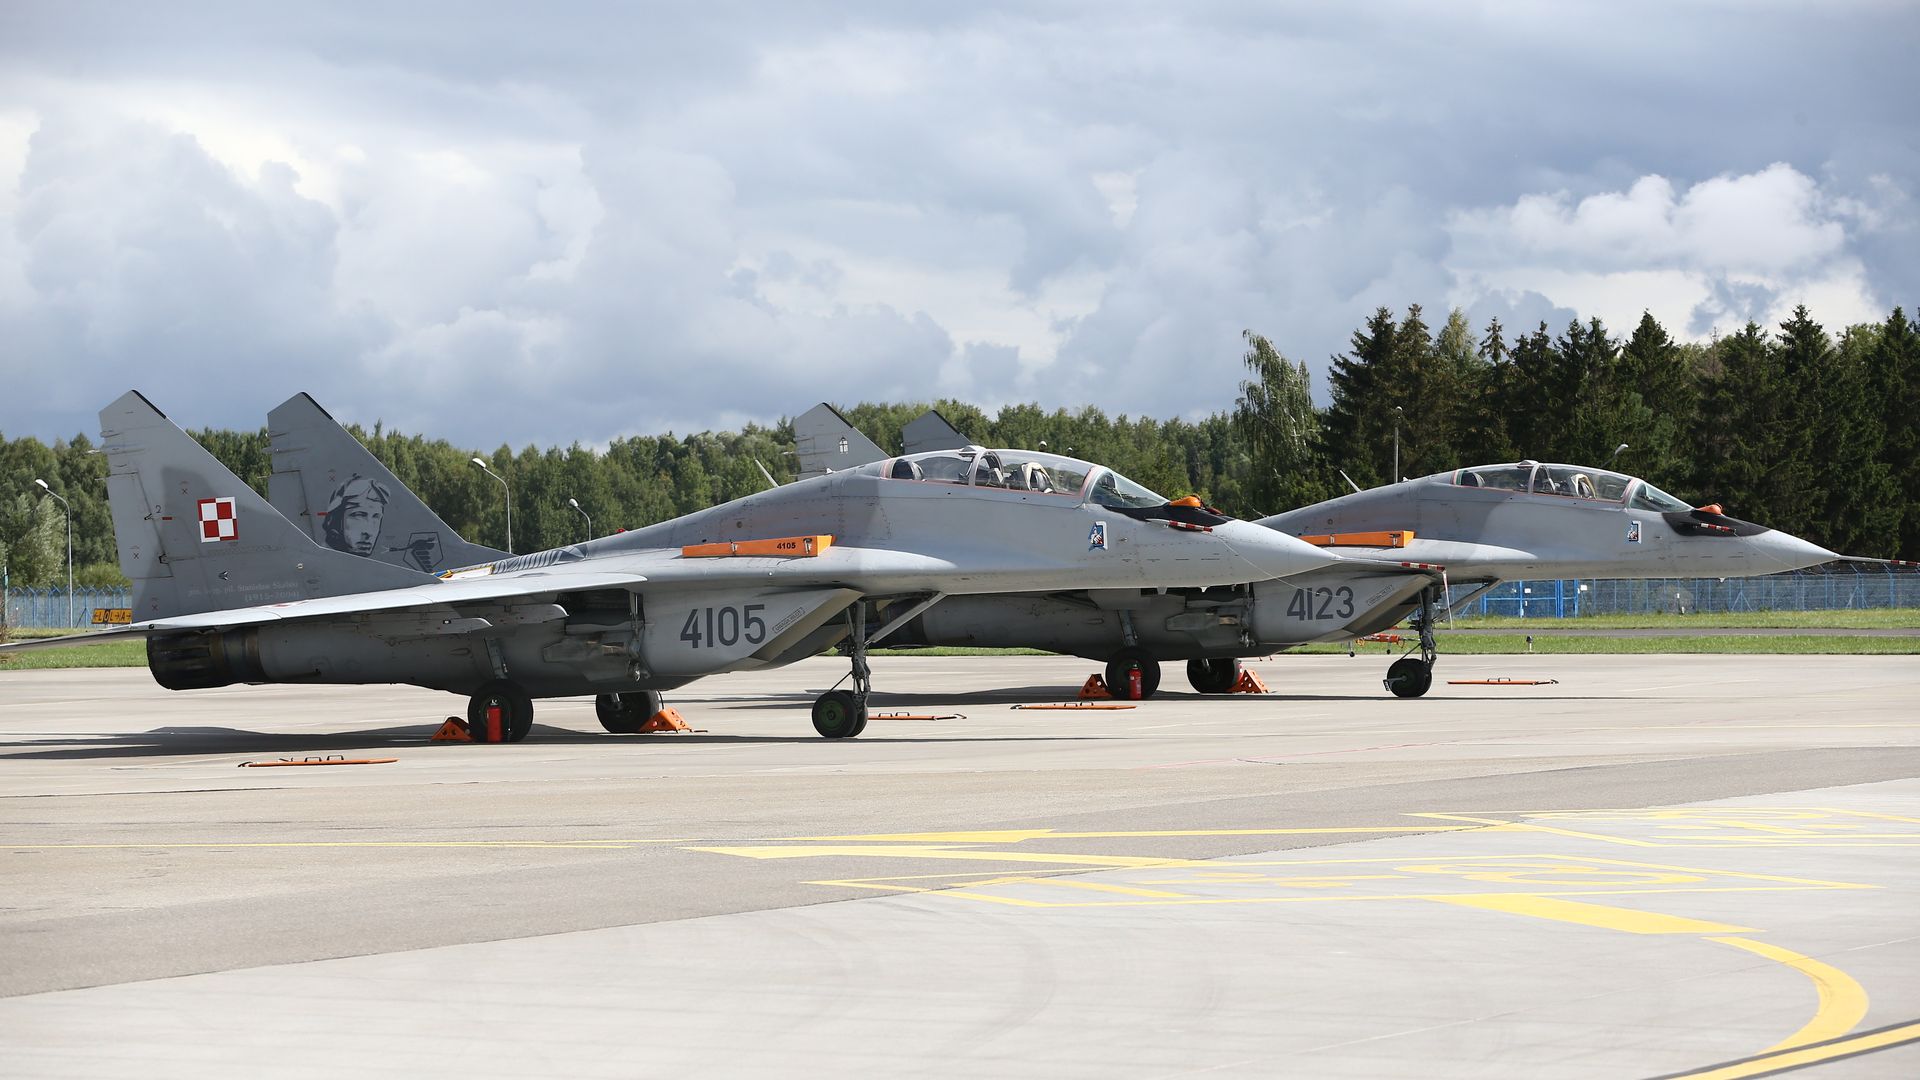 Polish MIG-29 fighter jets at an air force base in Malbork, Poland in August 2021.